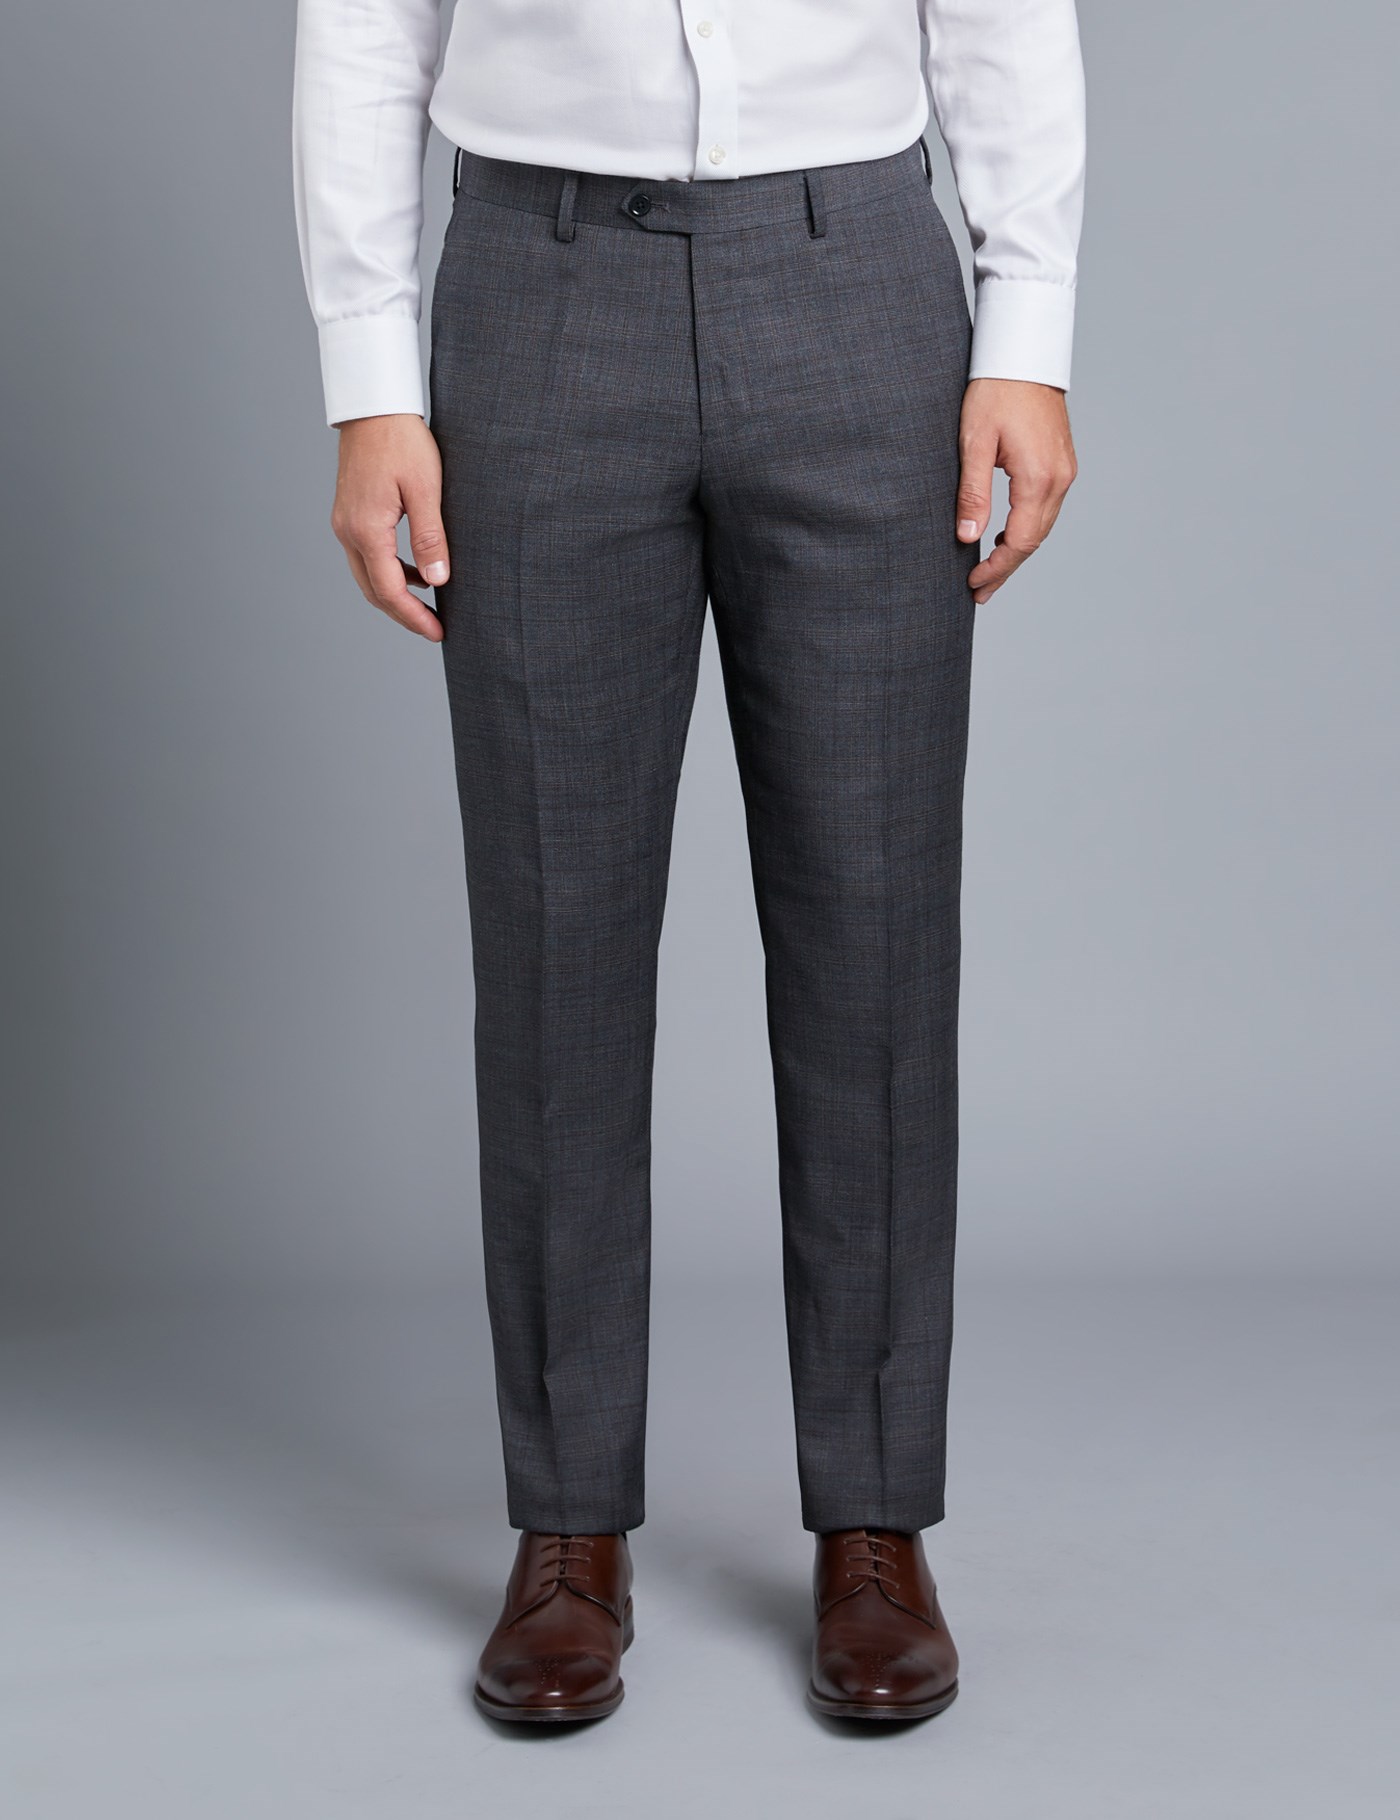 Men's Grey & Brown Prince Of Wales Check Slim Fit Trousers | Hawes & Curtis